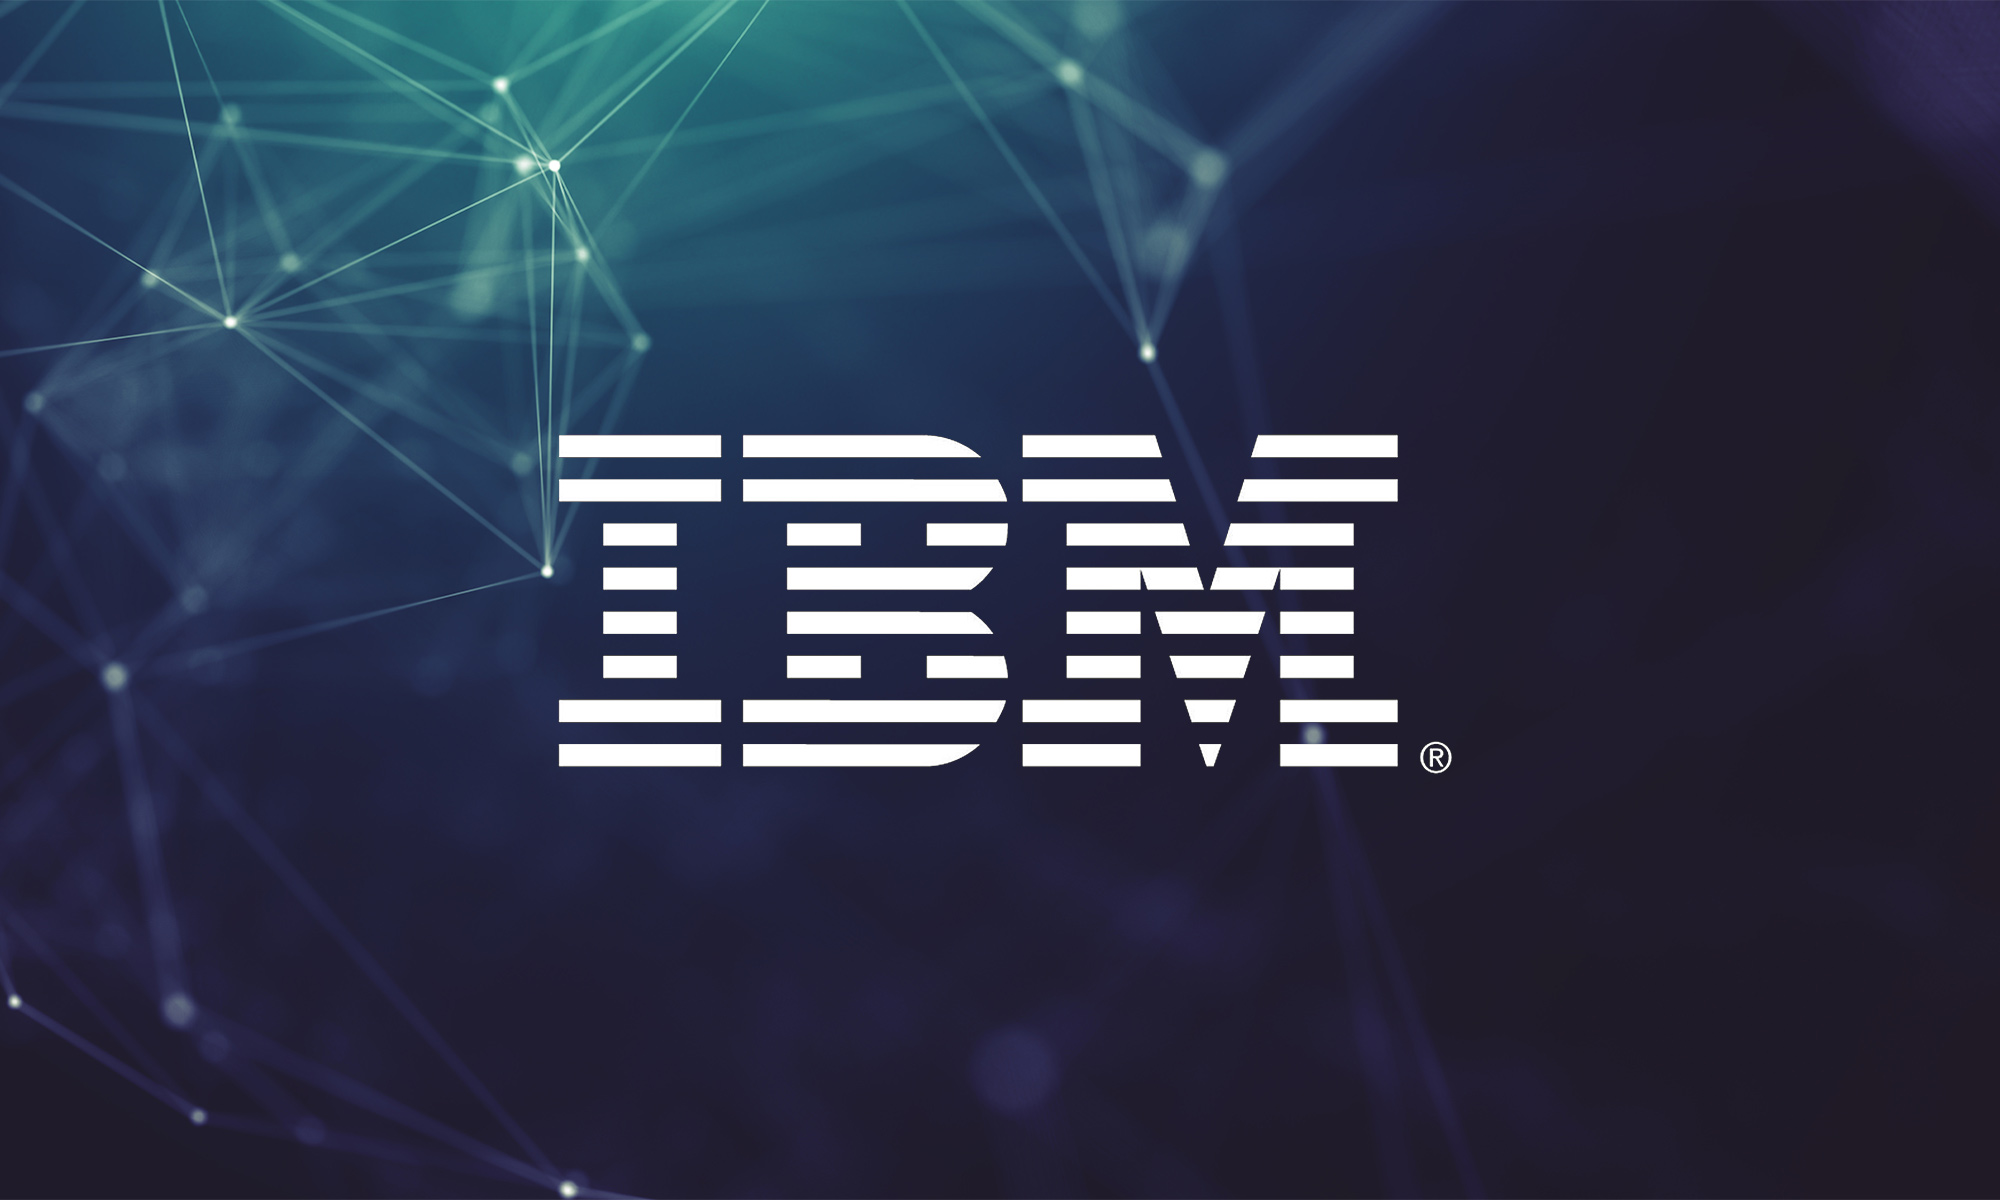 IBM: Artificial Intelligence and Research Projects